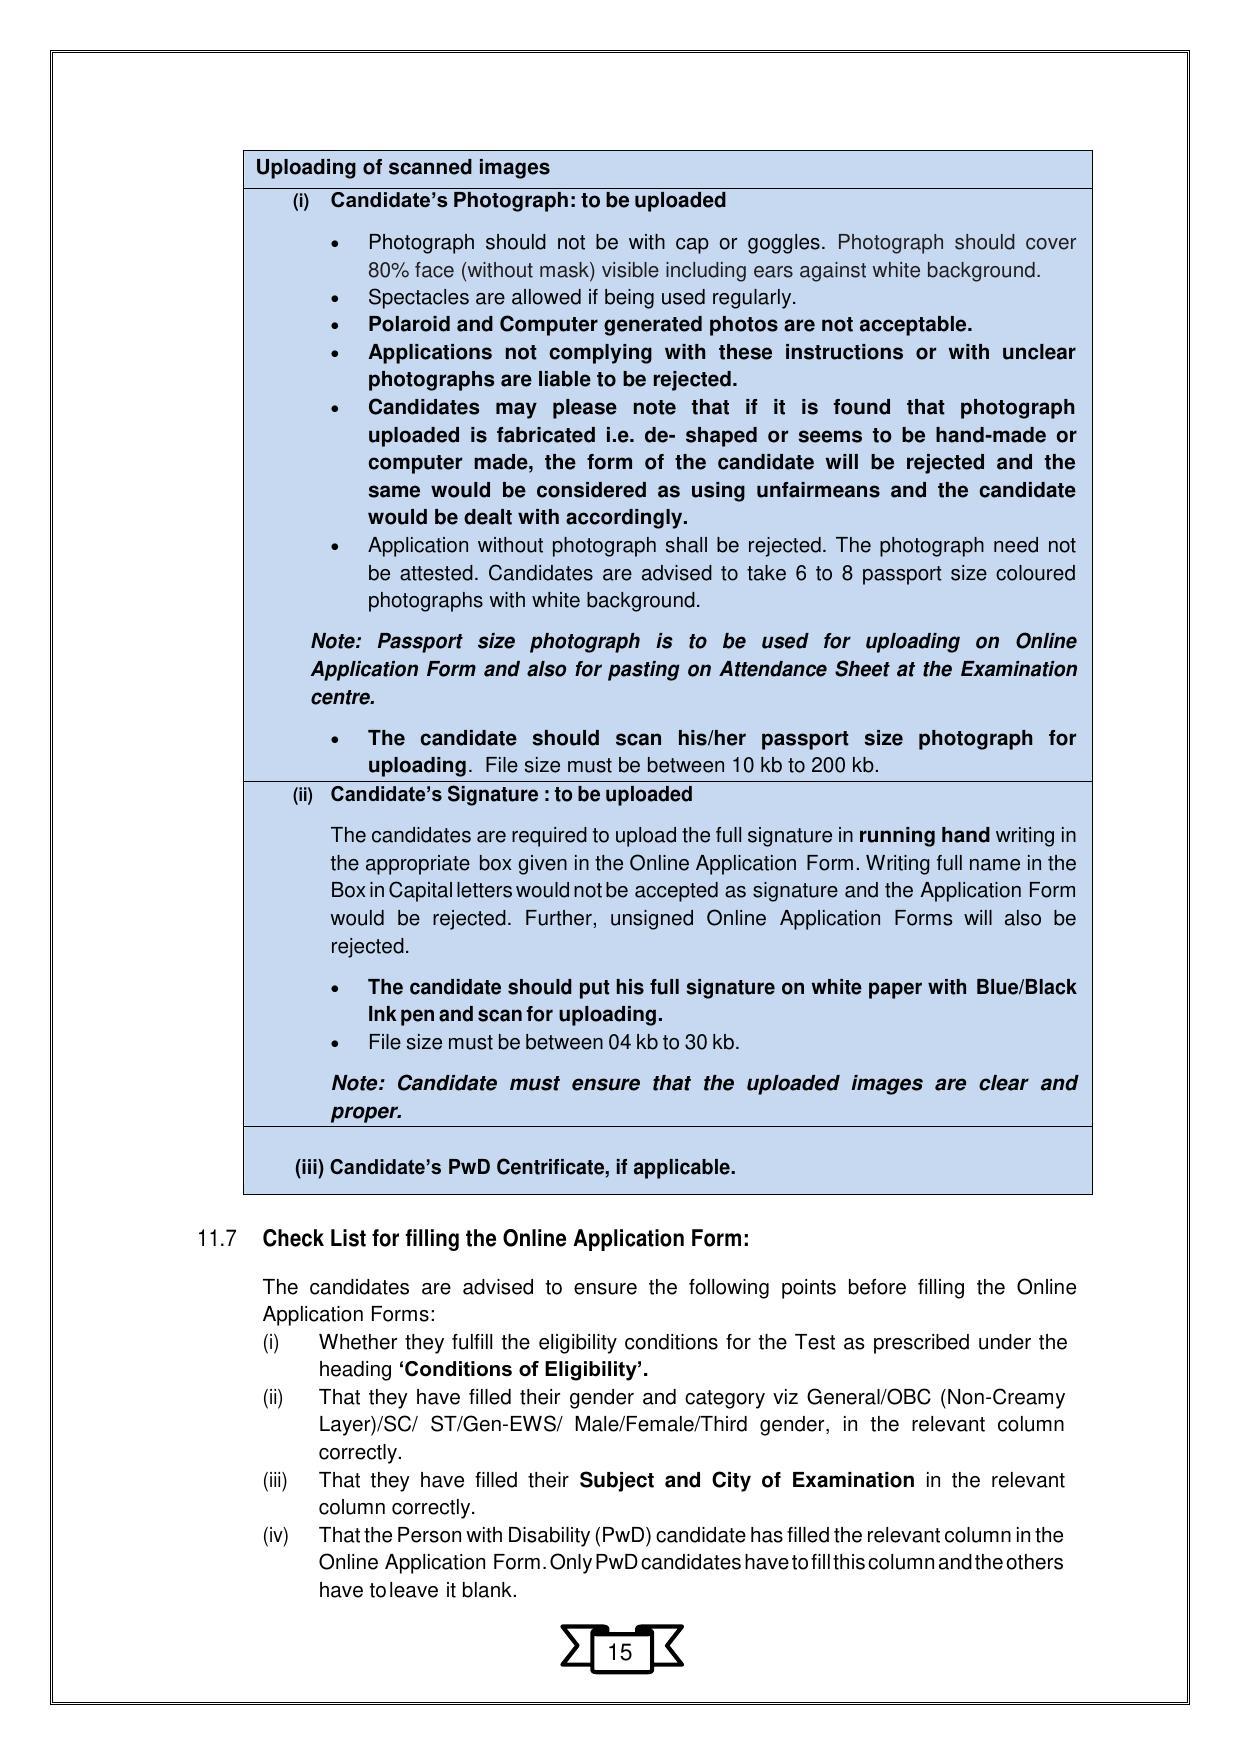 CMAT 2023 Information Bulletin - Page 18